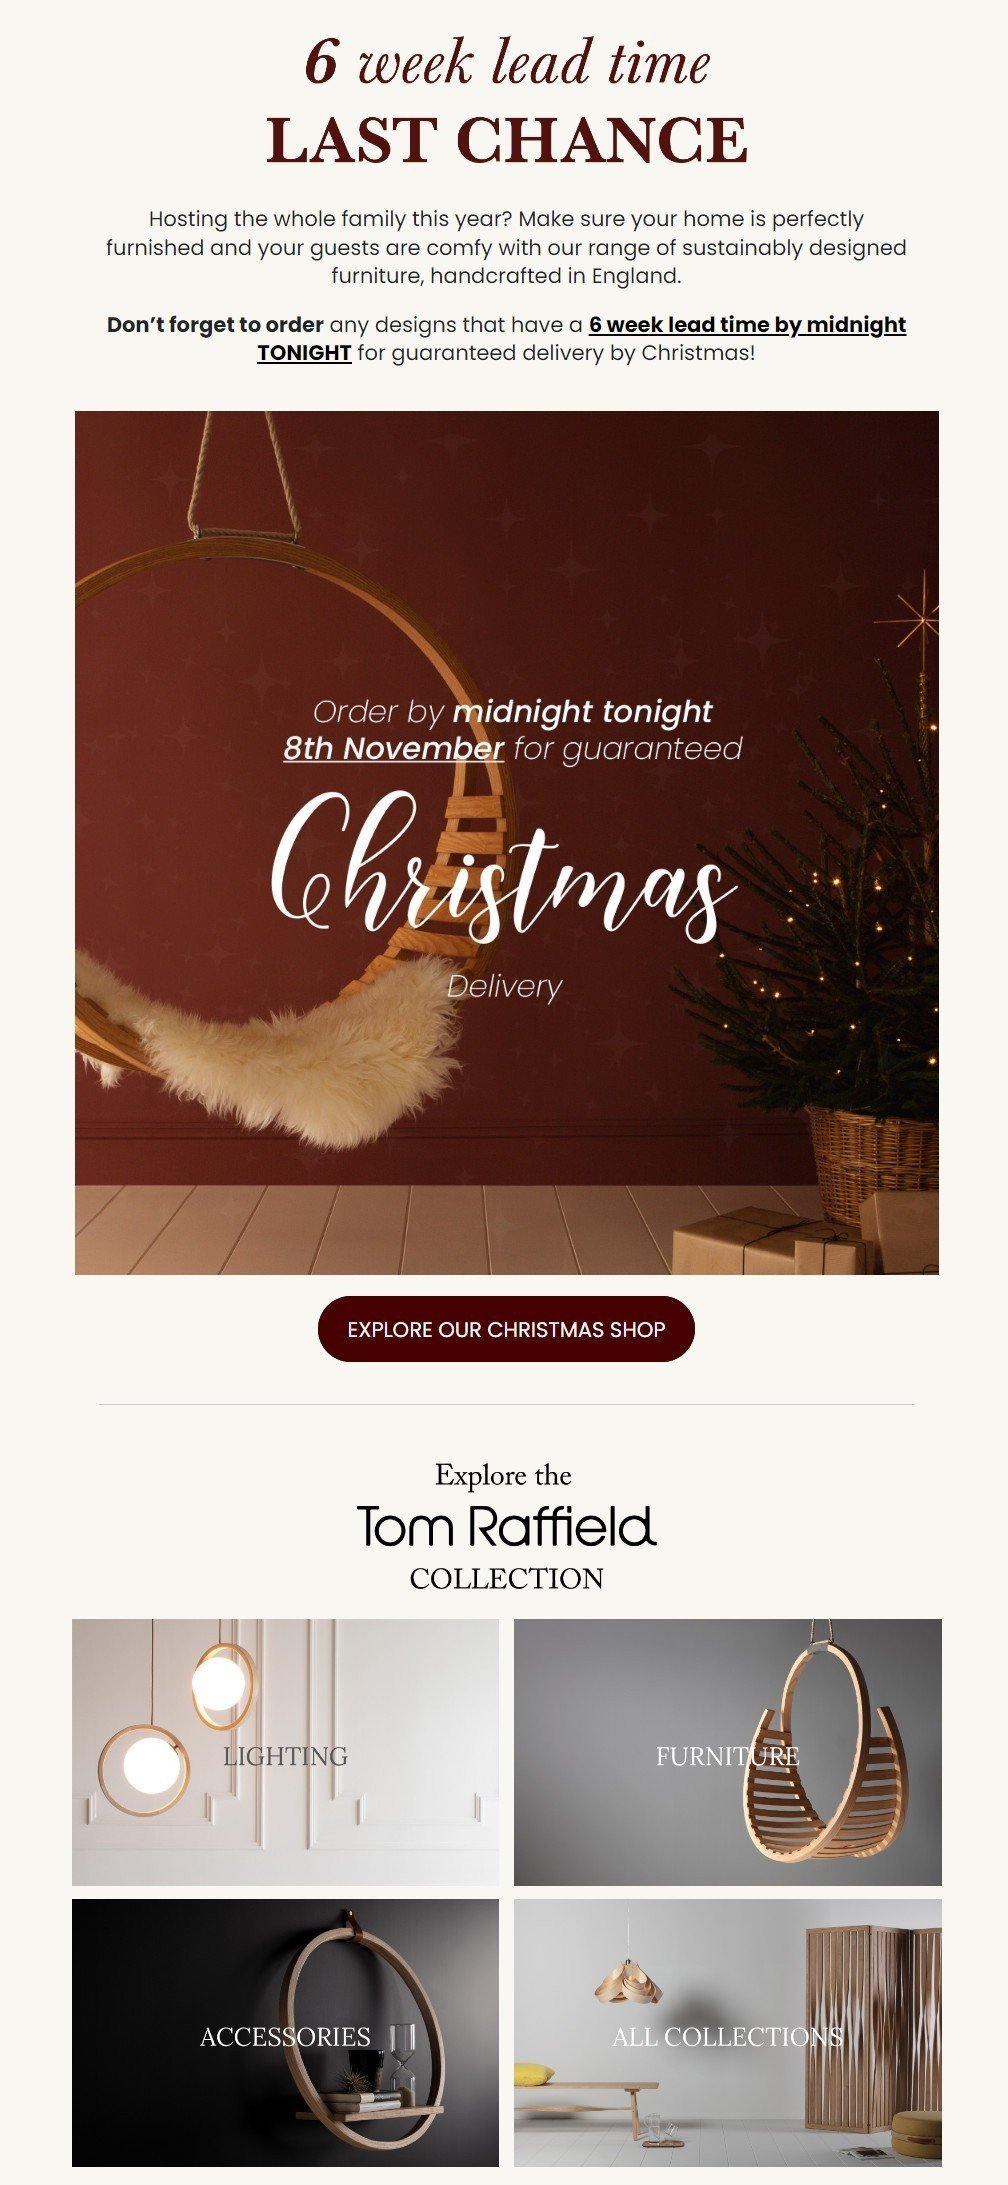 Email Idea to Wish Your Subscribers Merry Christmas